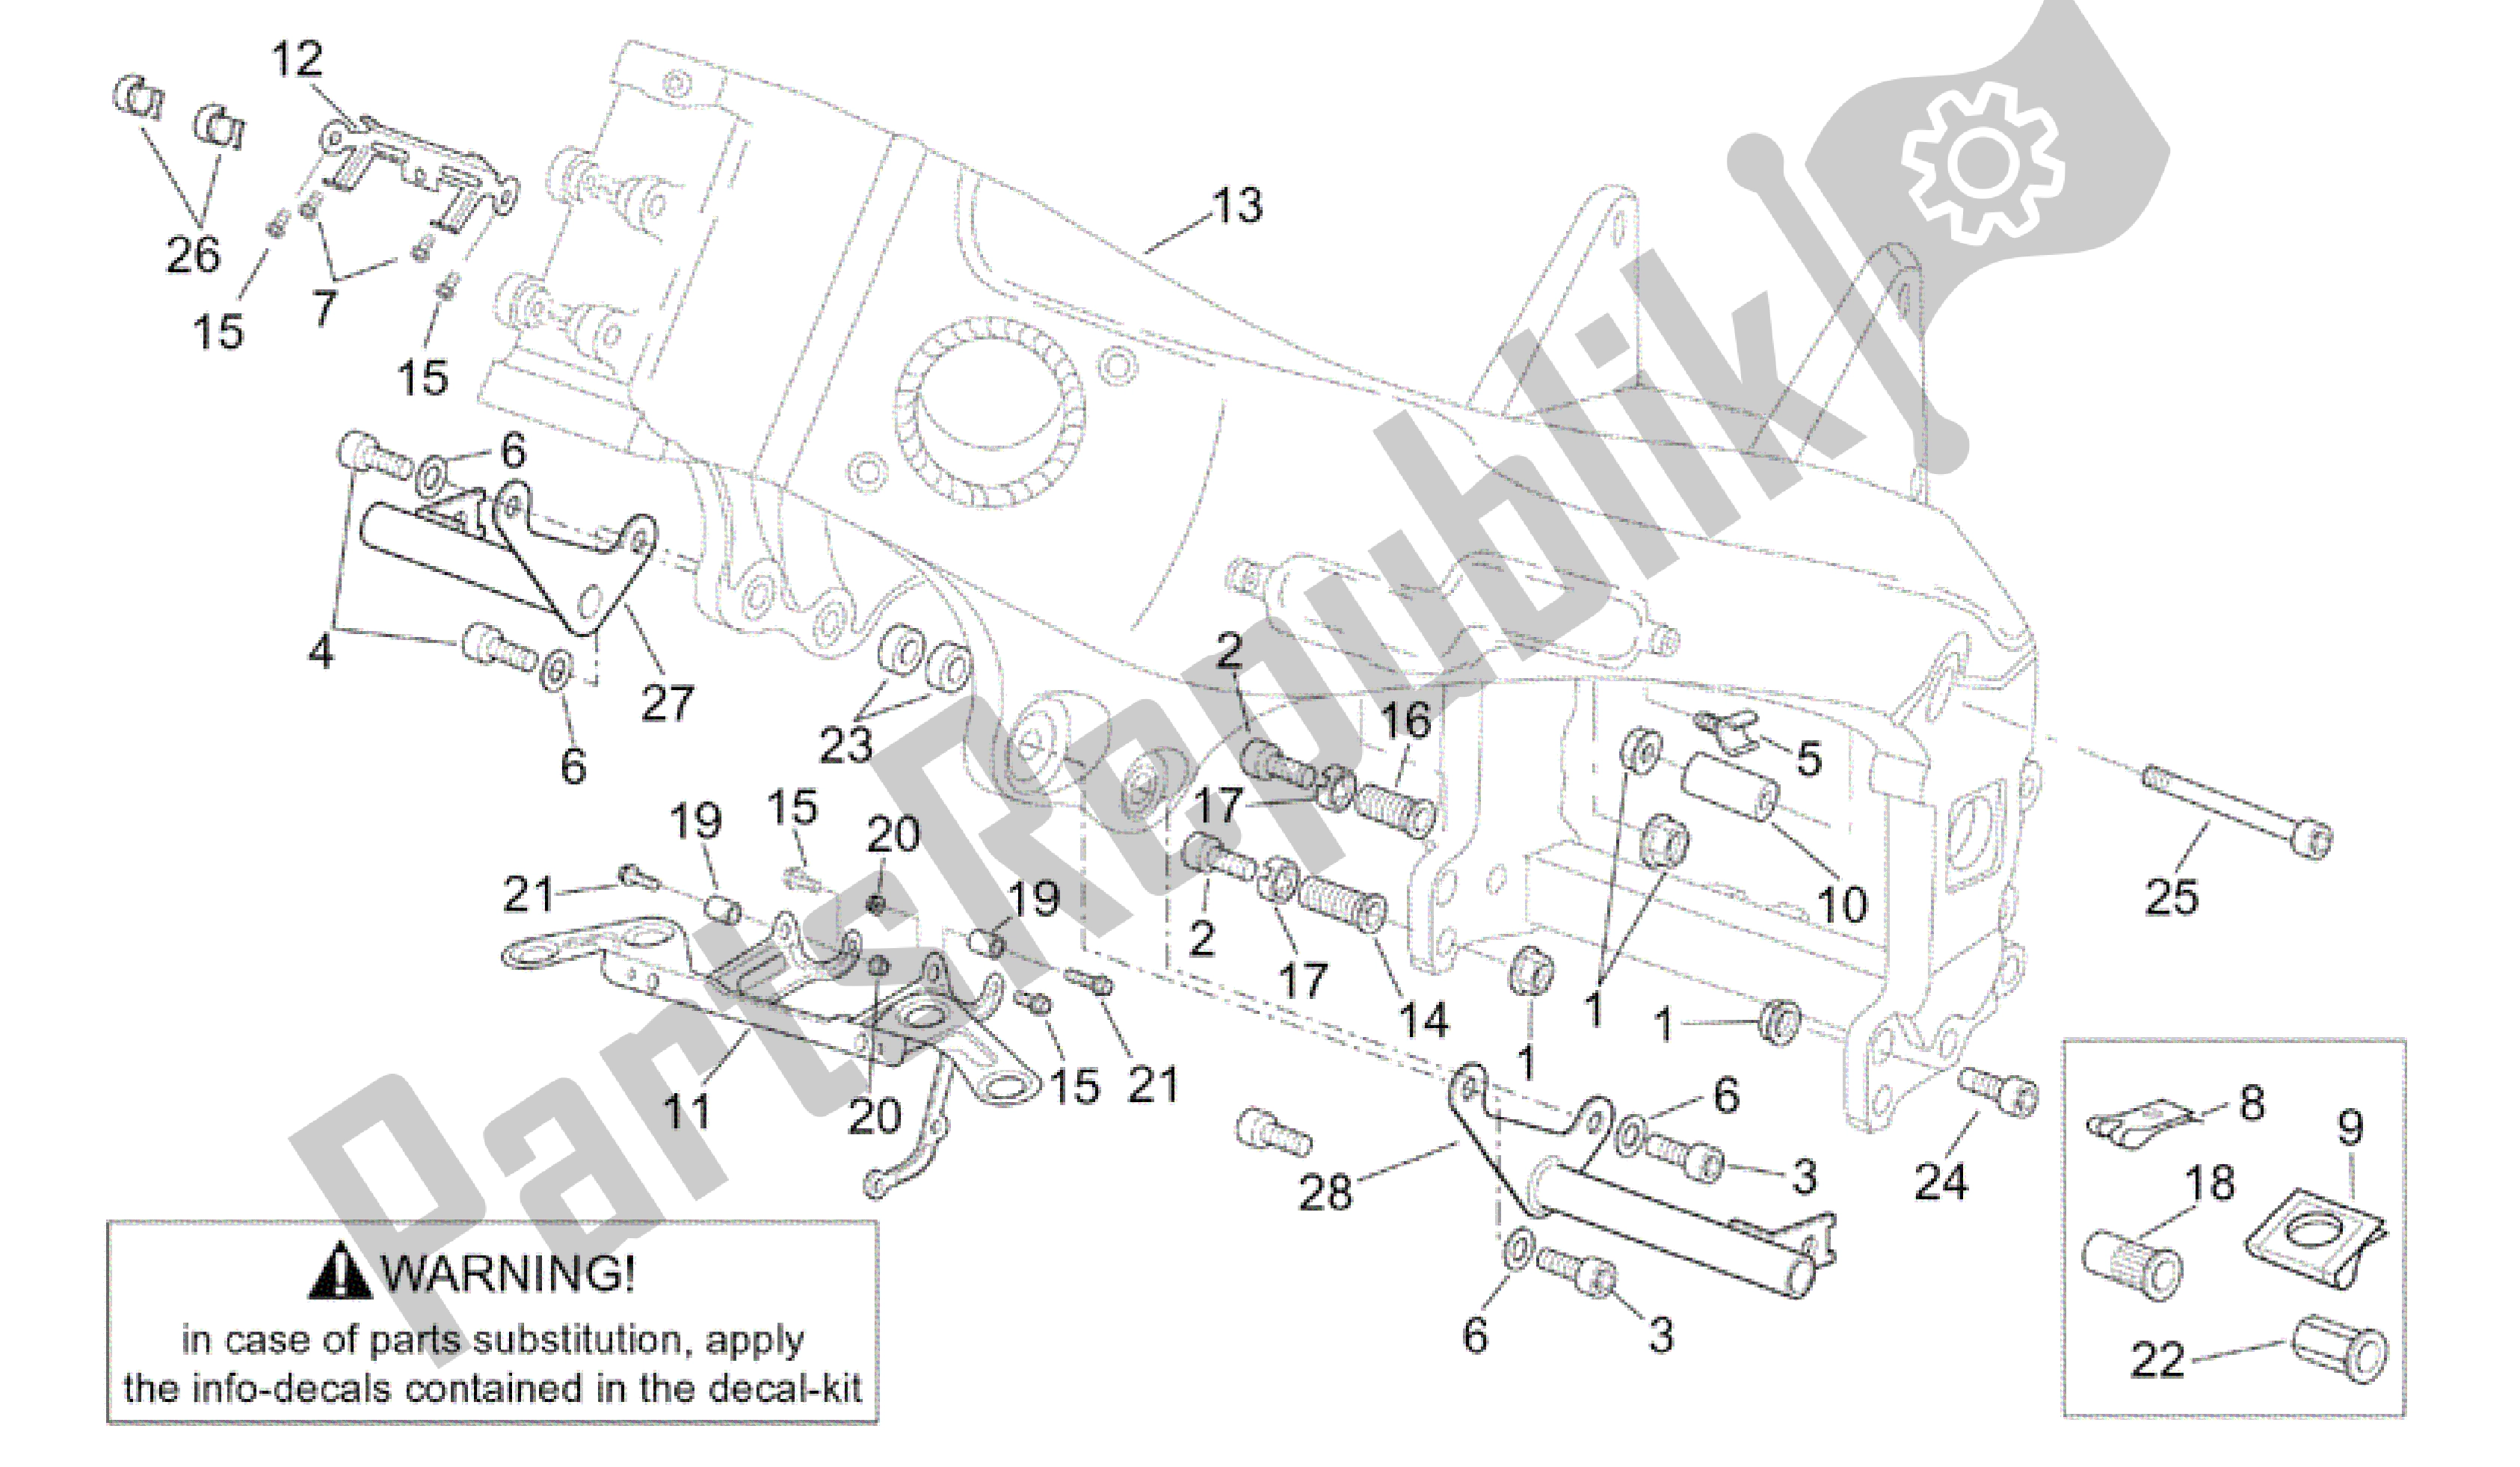 All parts for the Frame Iii of the Aprilia RSV Tuono RS 1000 2004 - 2005